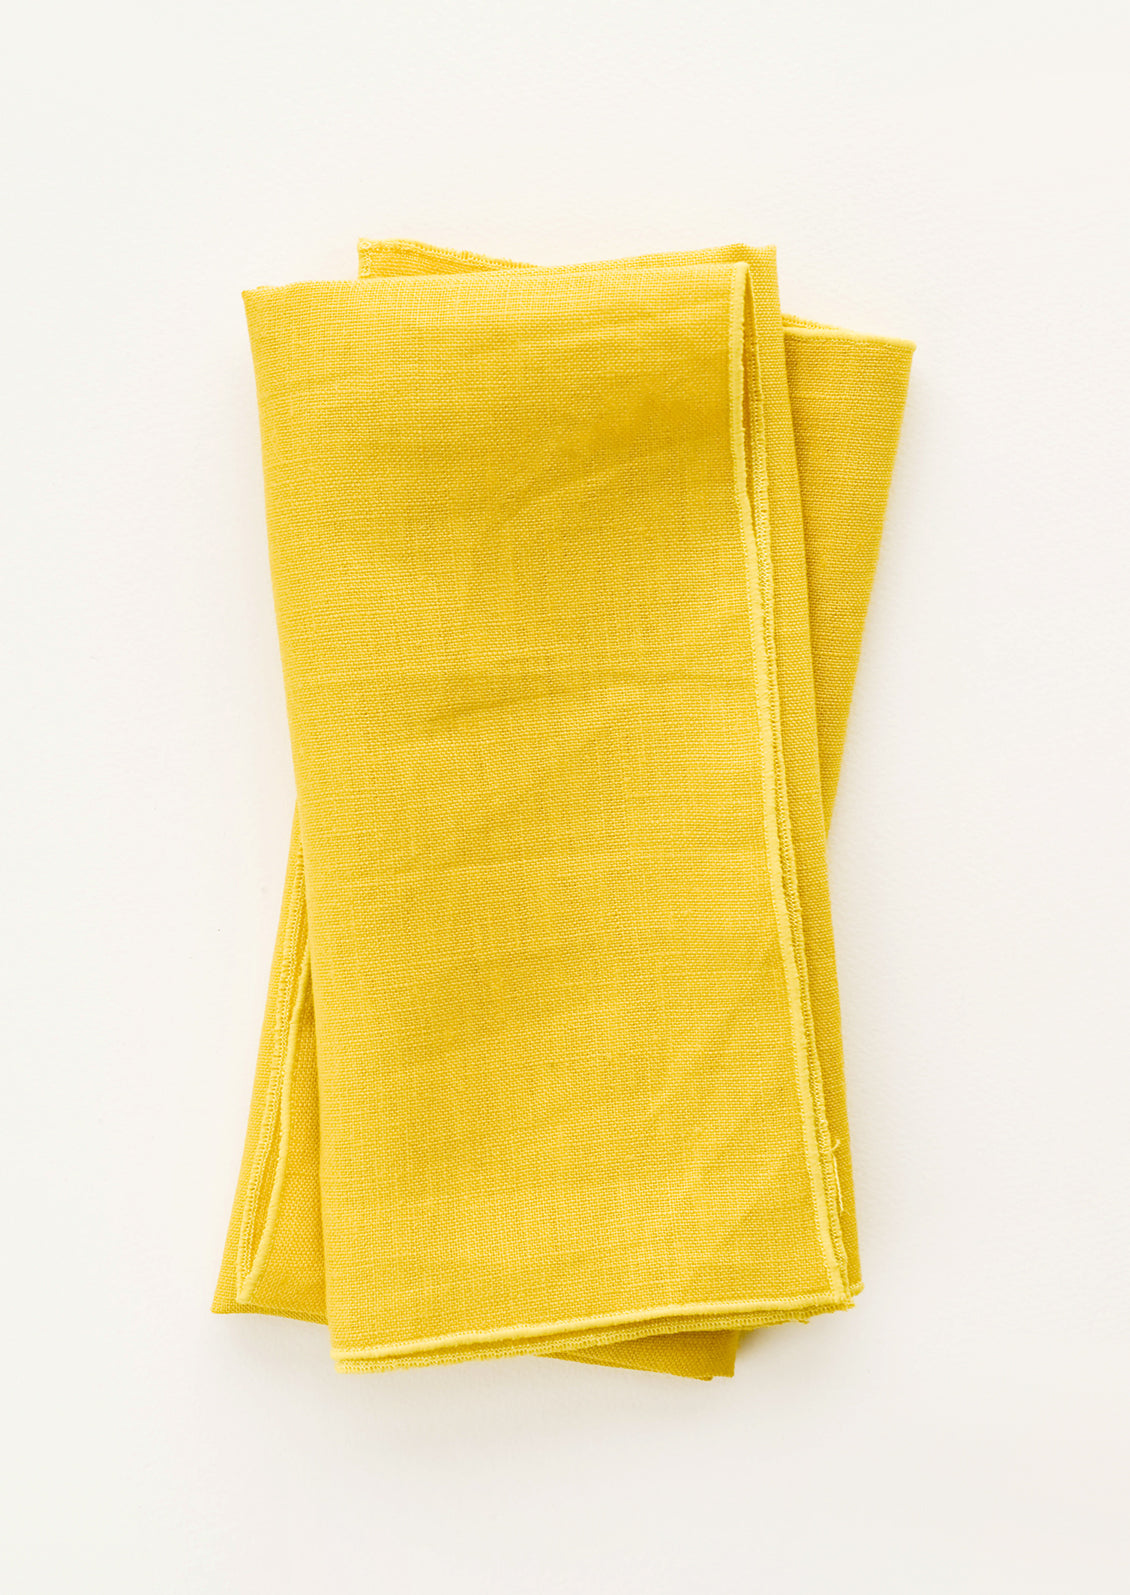 Pair of folded Linen Napkins in Yellow.